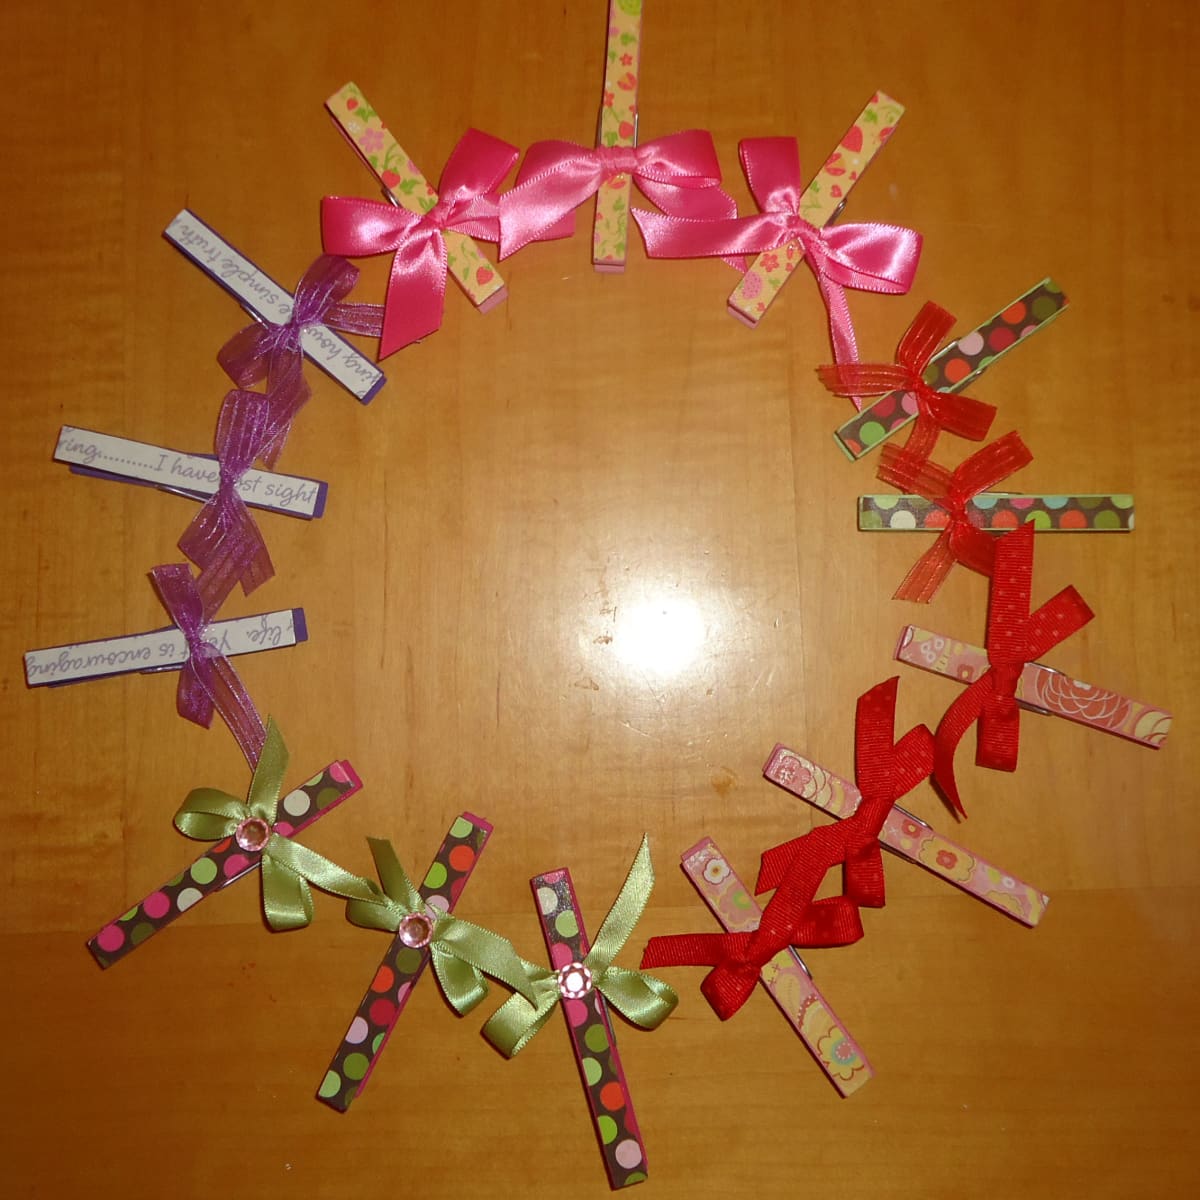 Make a Clothespin Cross in Four Easy Steps - Mod Podge Rocks